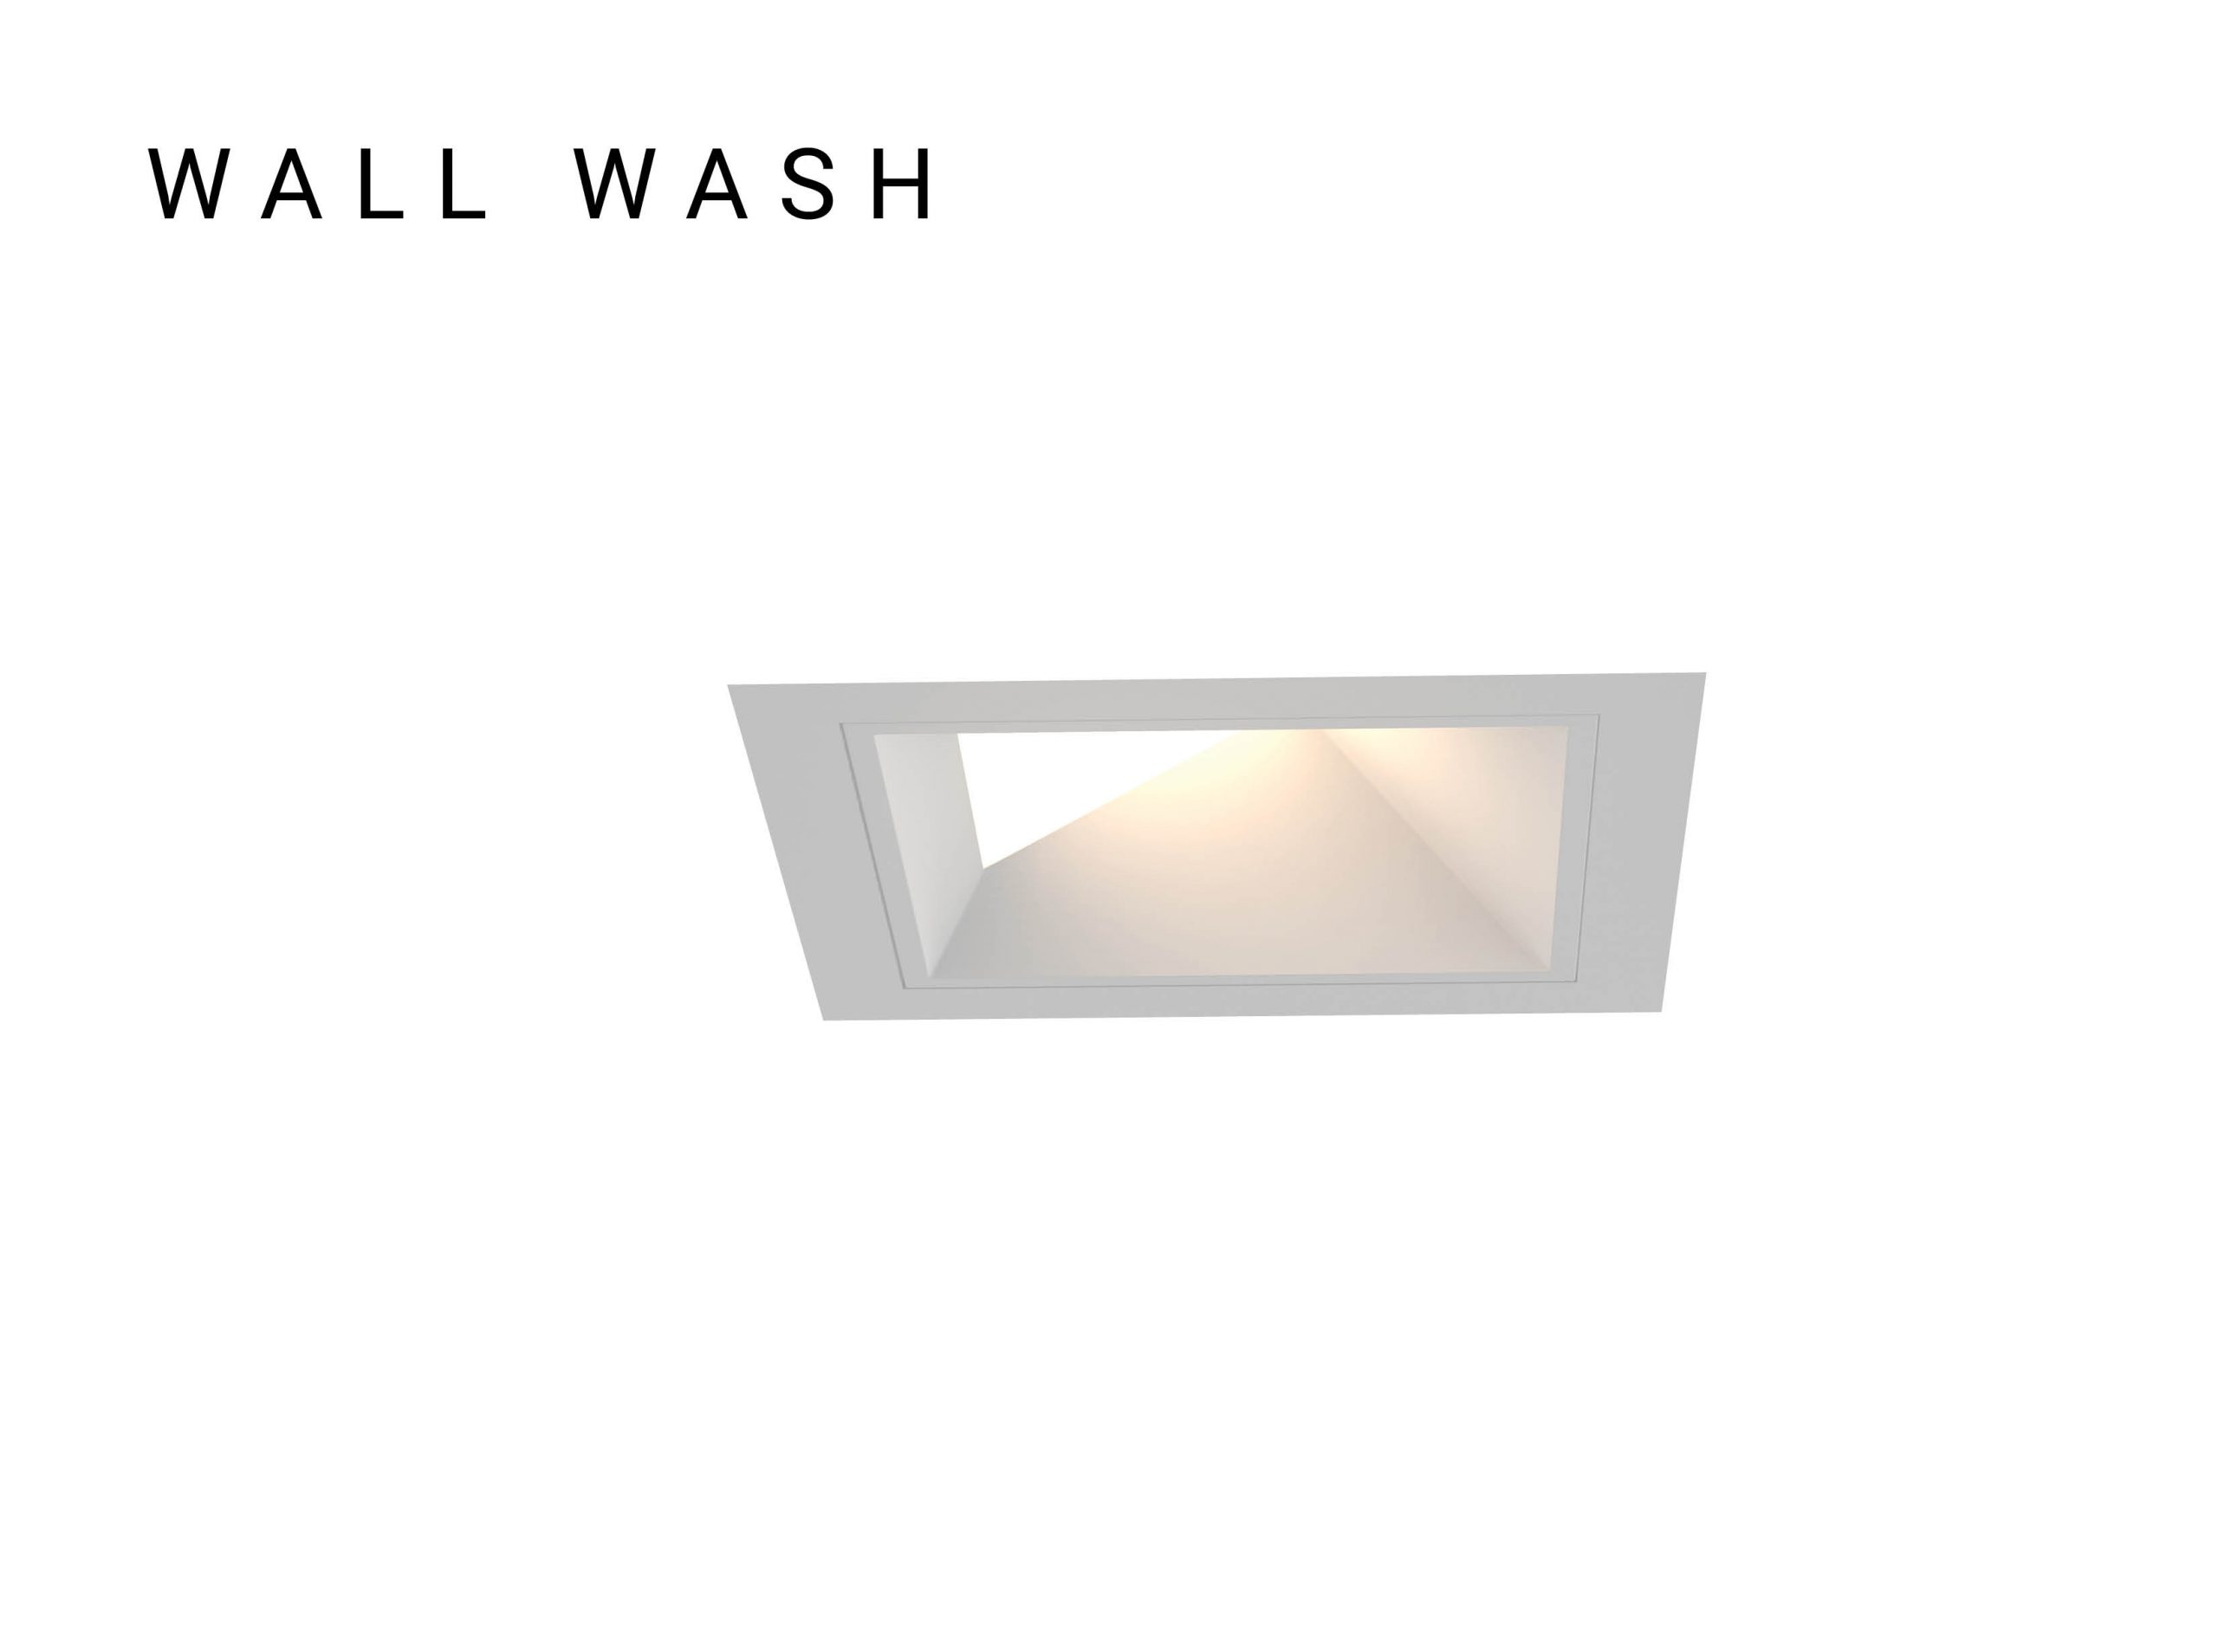 Bravo_WALL-WASH_Banner_01-1-scaled